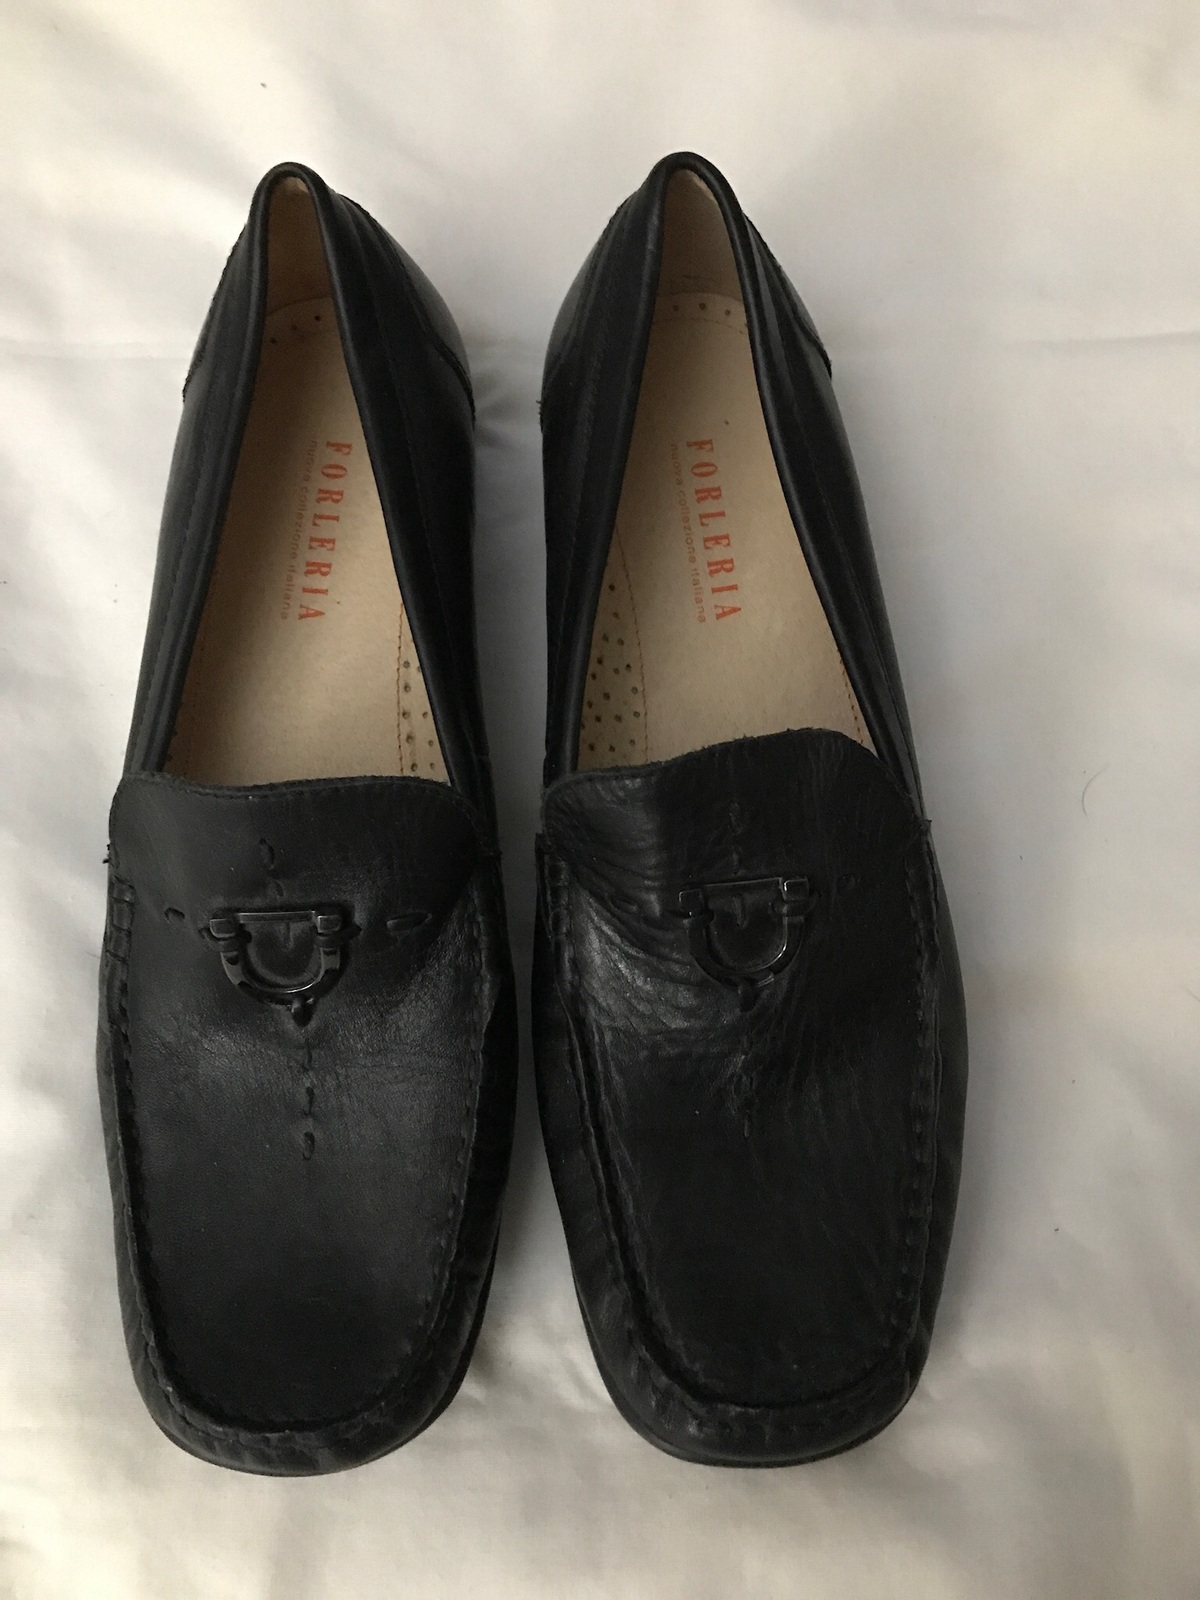 Women's Forleria Shoes size 9 Made in Italy - Flats & Oxfords